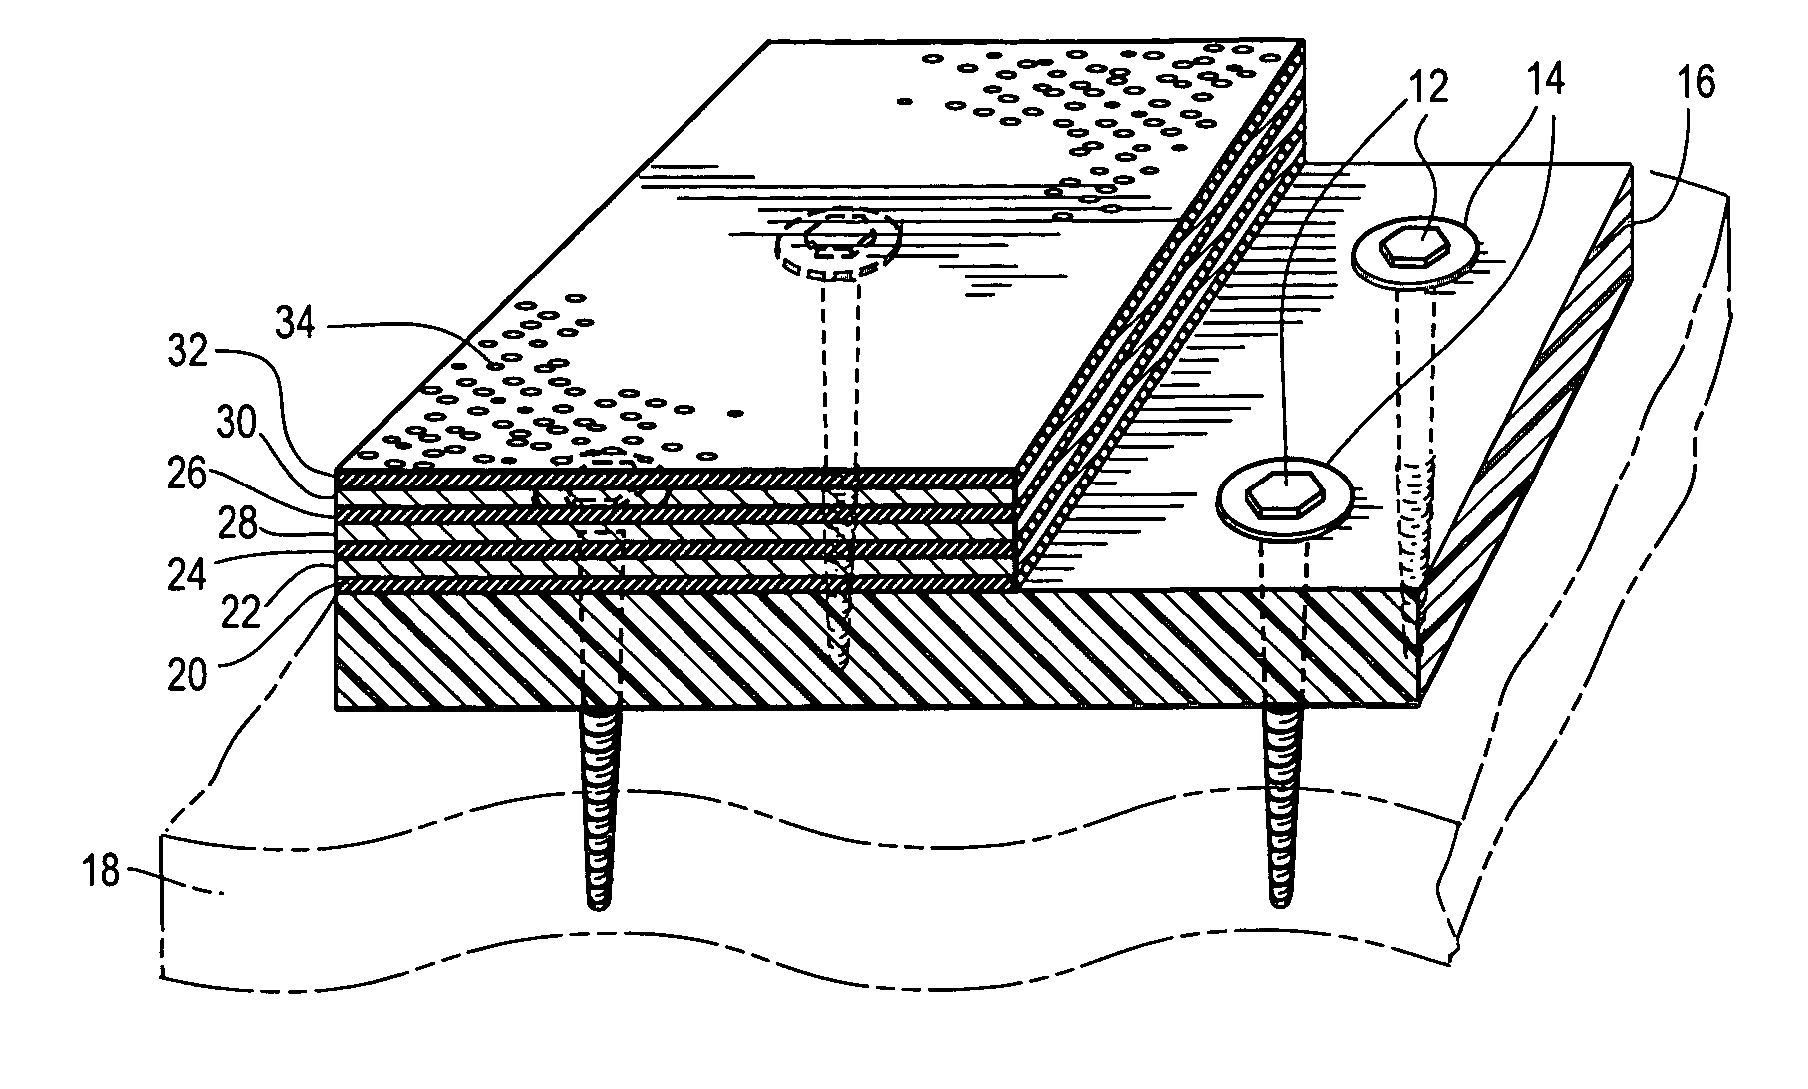 Foamed roofing materials and methods of use